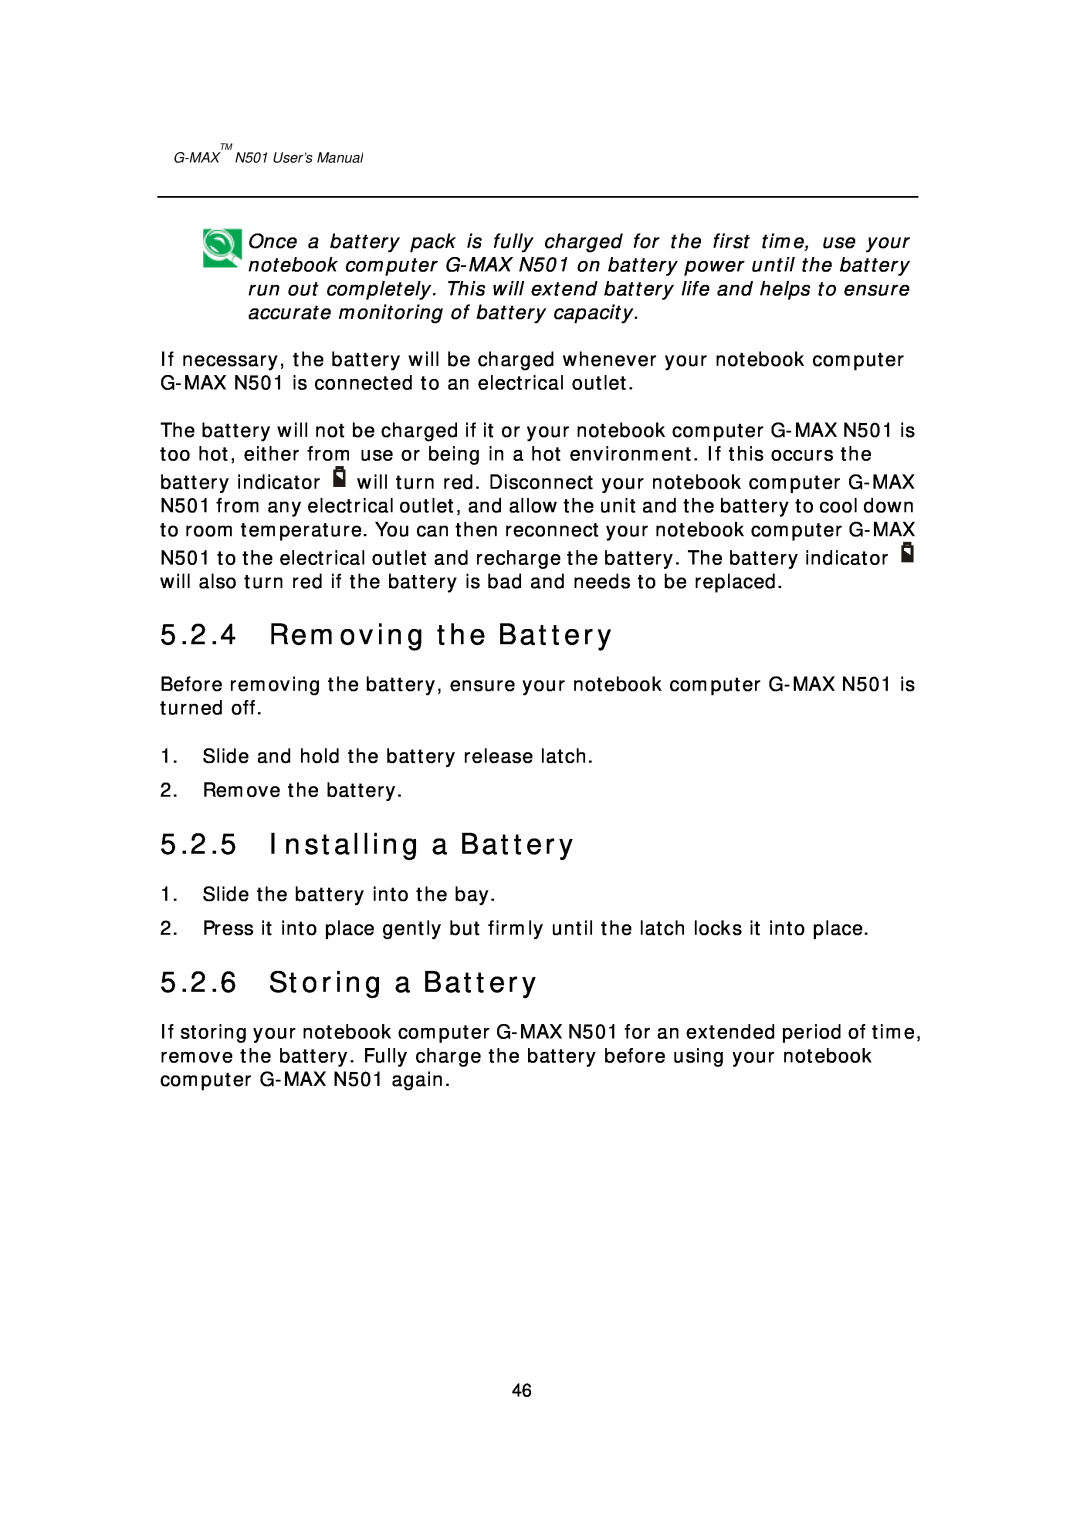 Gigabyte G-MAX N501 user manual Removing the Battery, Installing a Battery, Storing a Battery 